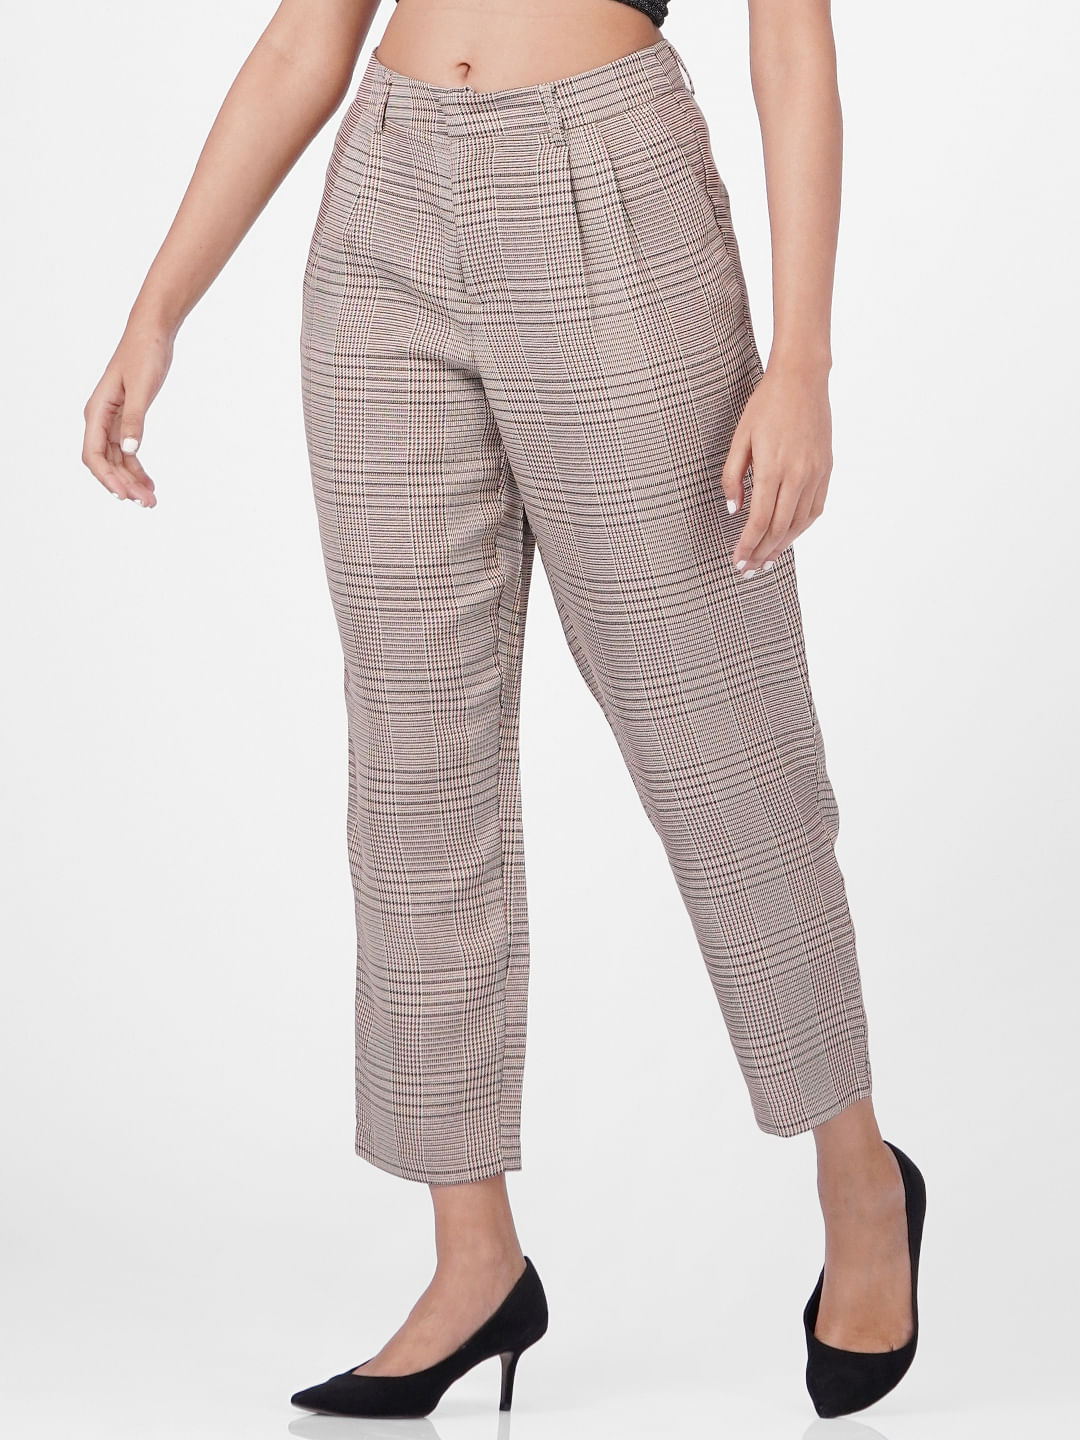 Styli Trousers and Pants  Buy Styli High Waist Glen Checked Straight Leg  Trouser Online  Nykaa Fashion